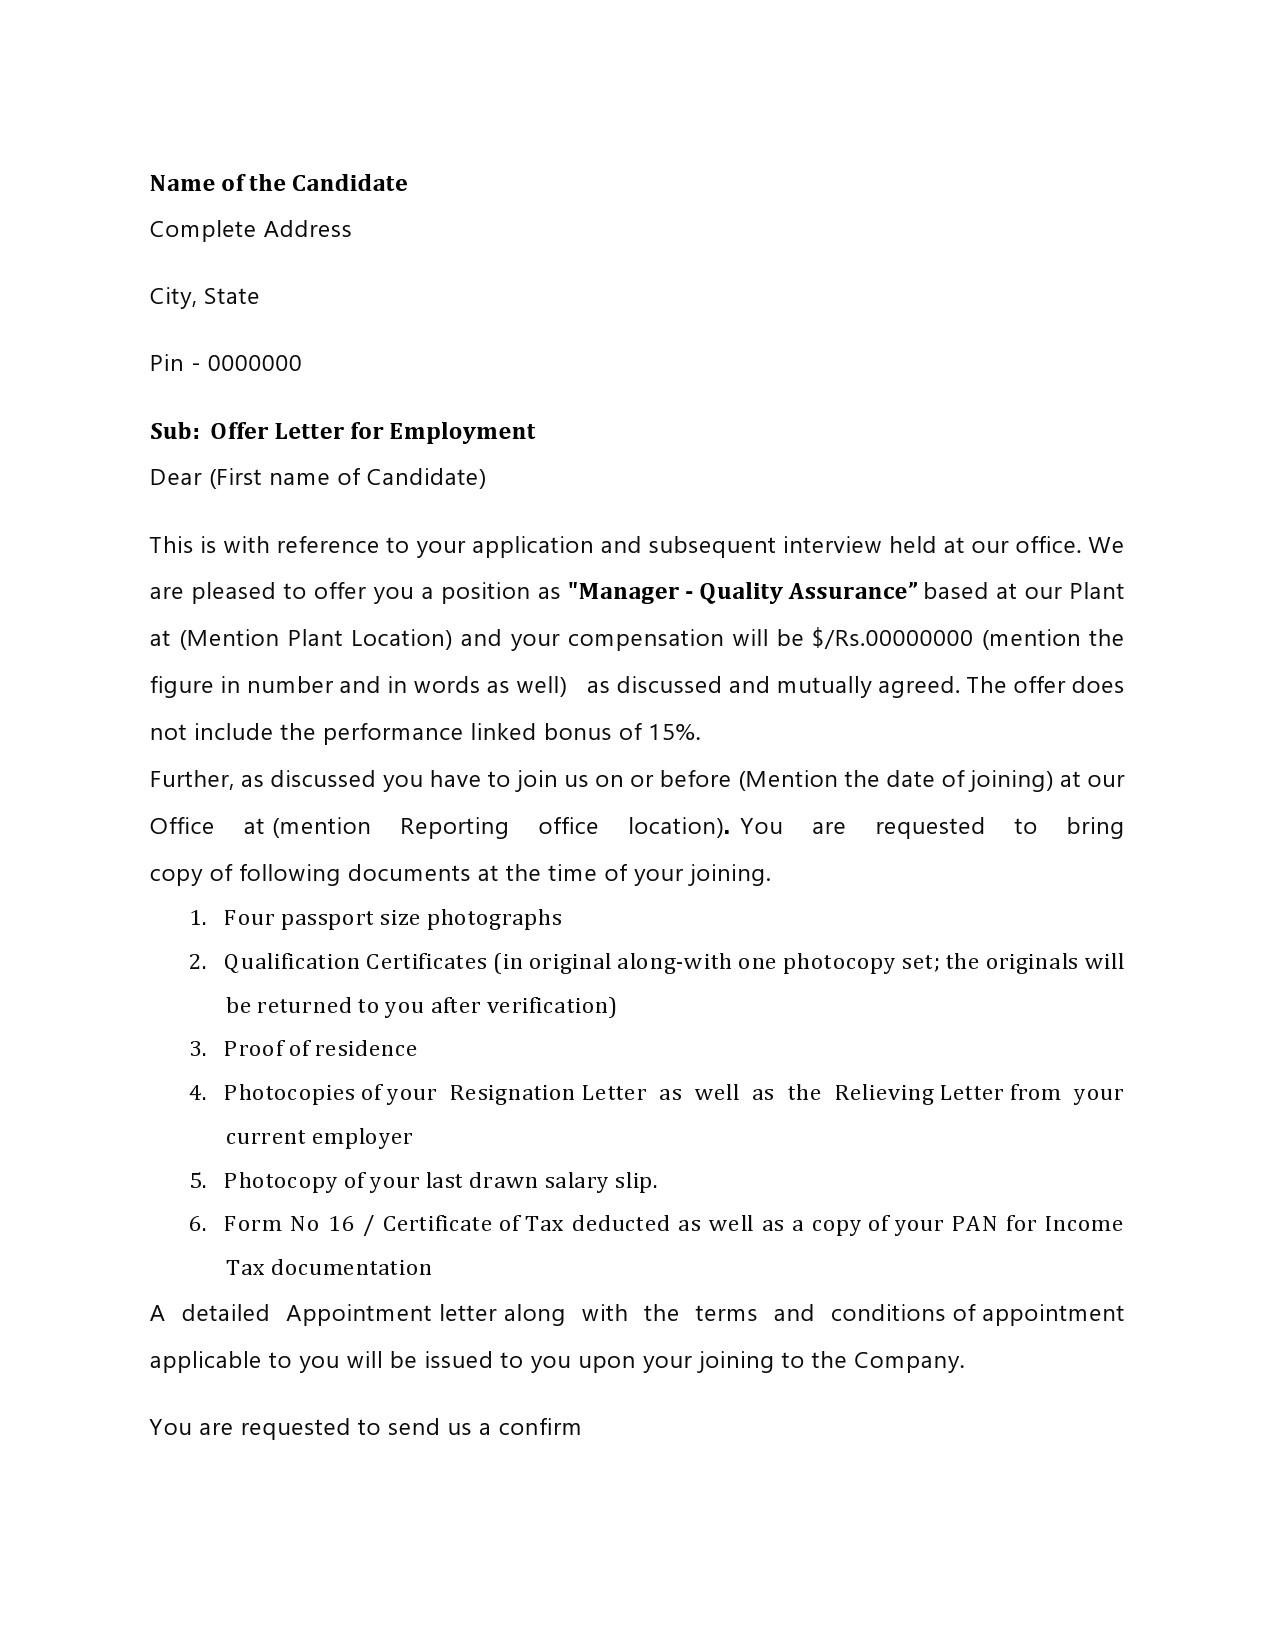 Free employment offer letter template 09